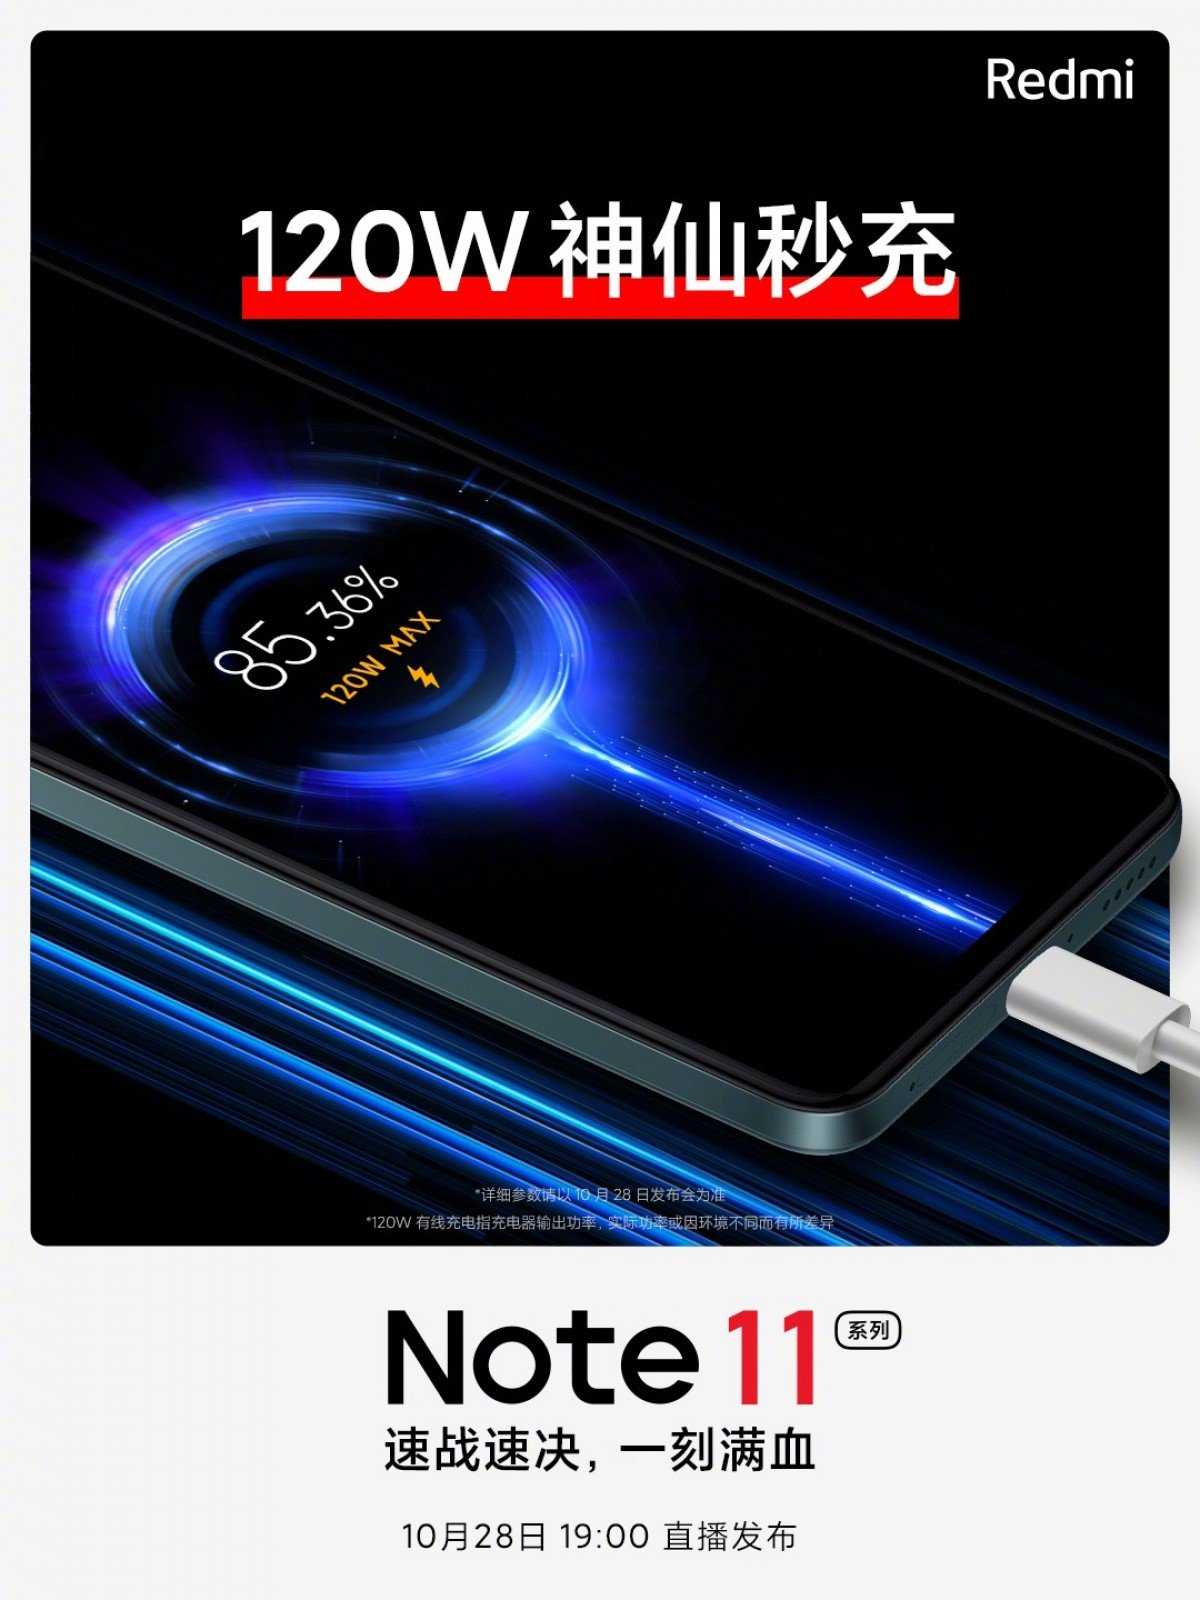 Redmi Note 11 Teaser 120w Charging